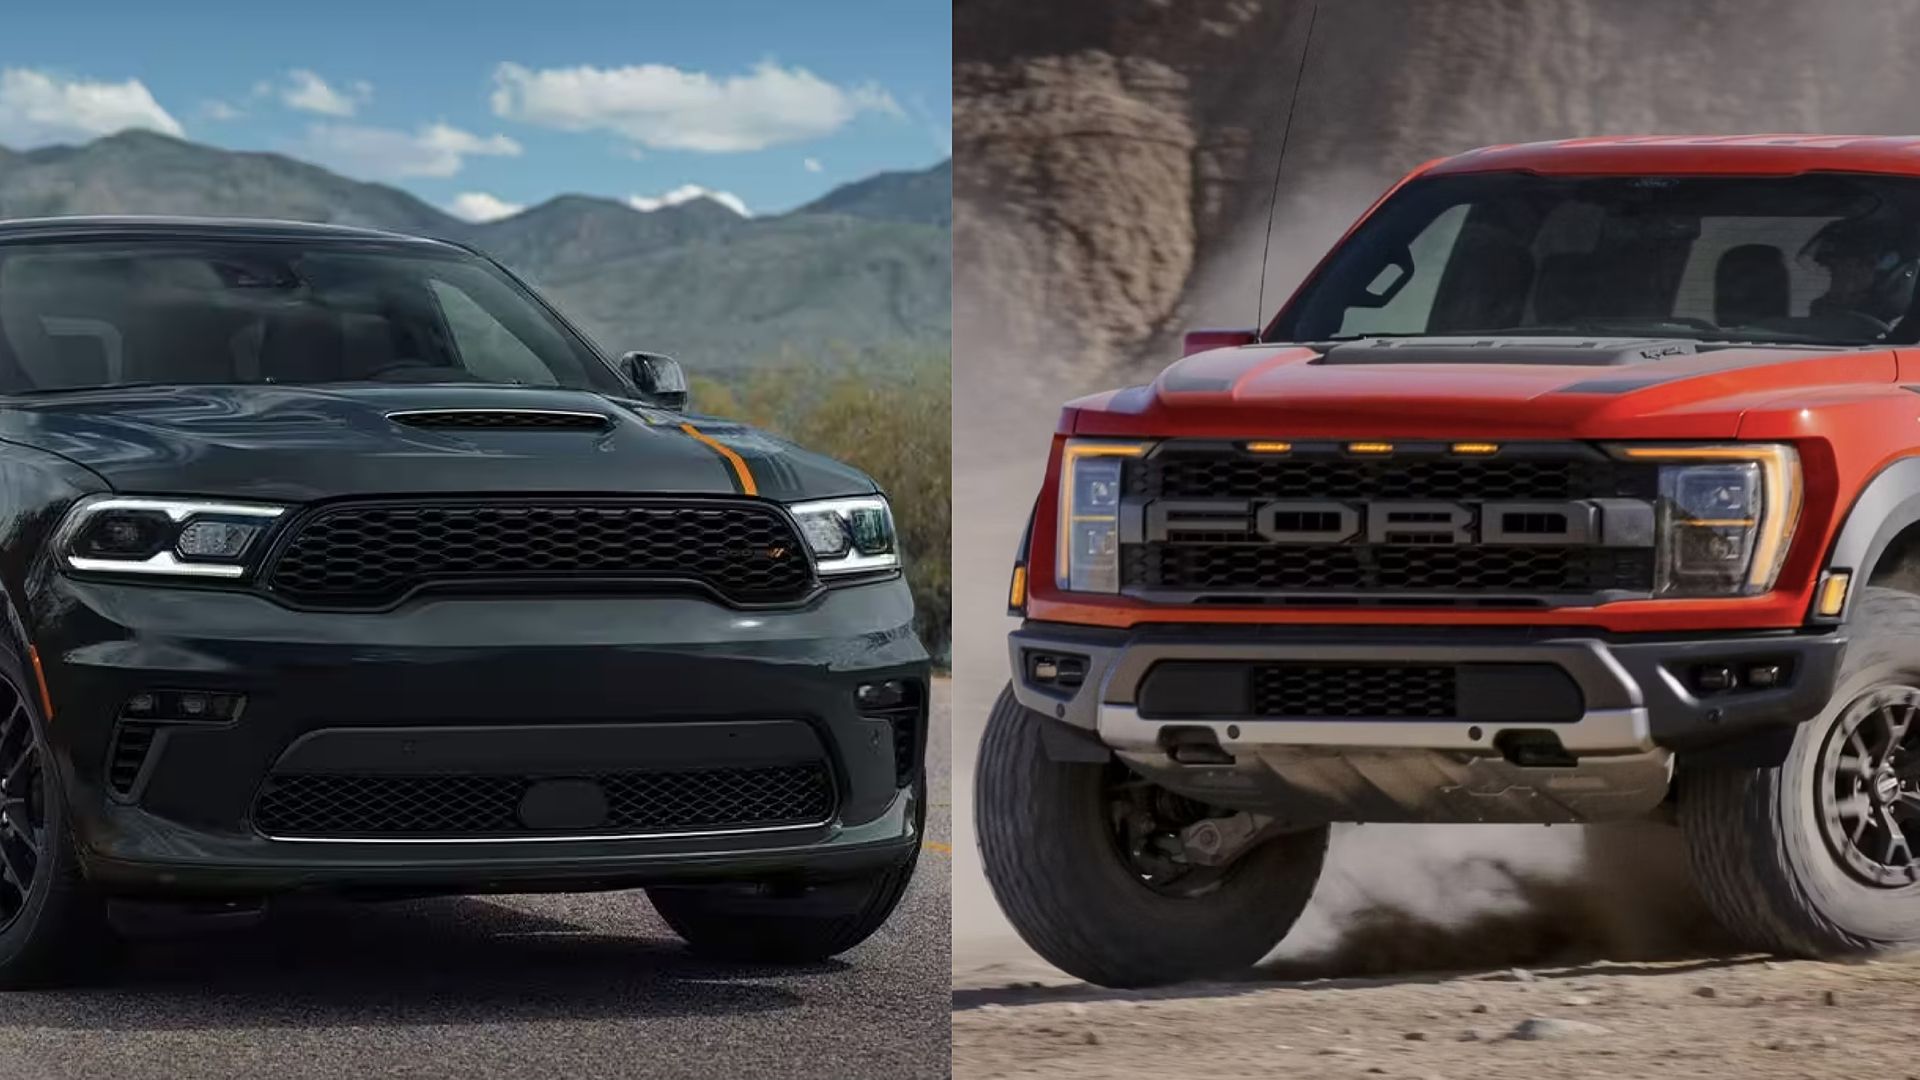 Front view of a Dodge Durango Hellcat and a Ford Raptor R